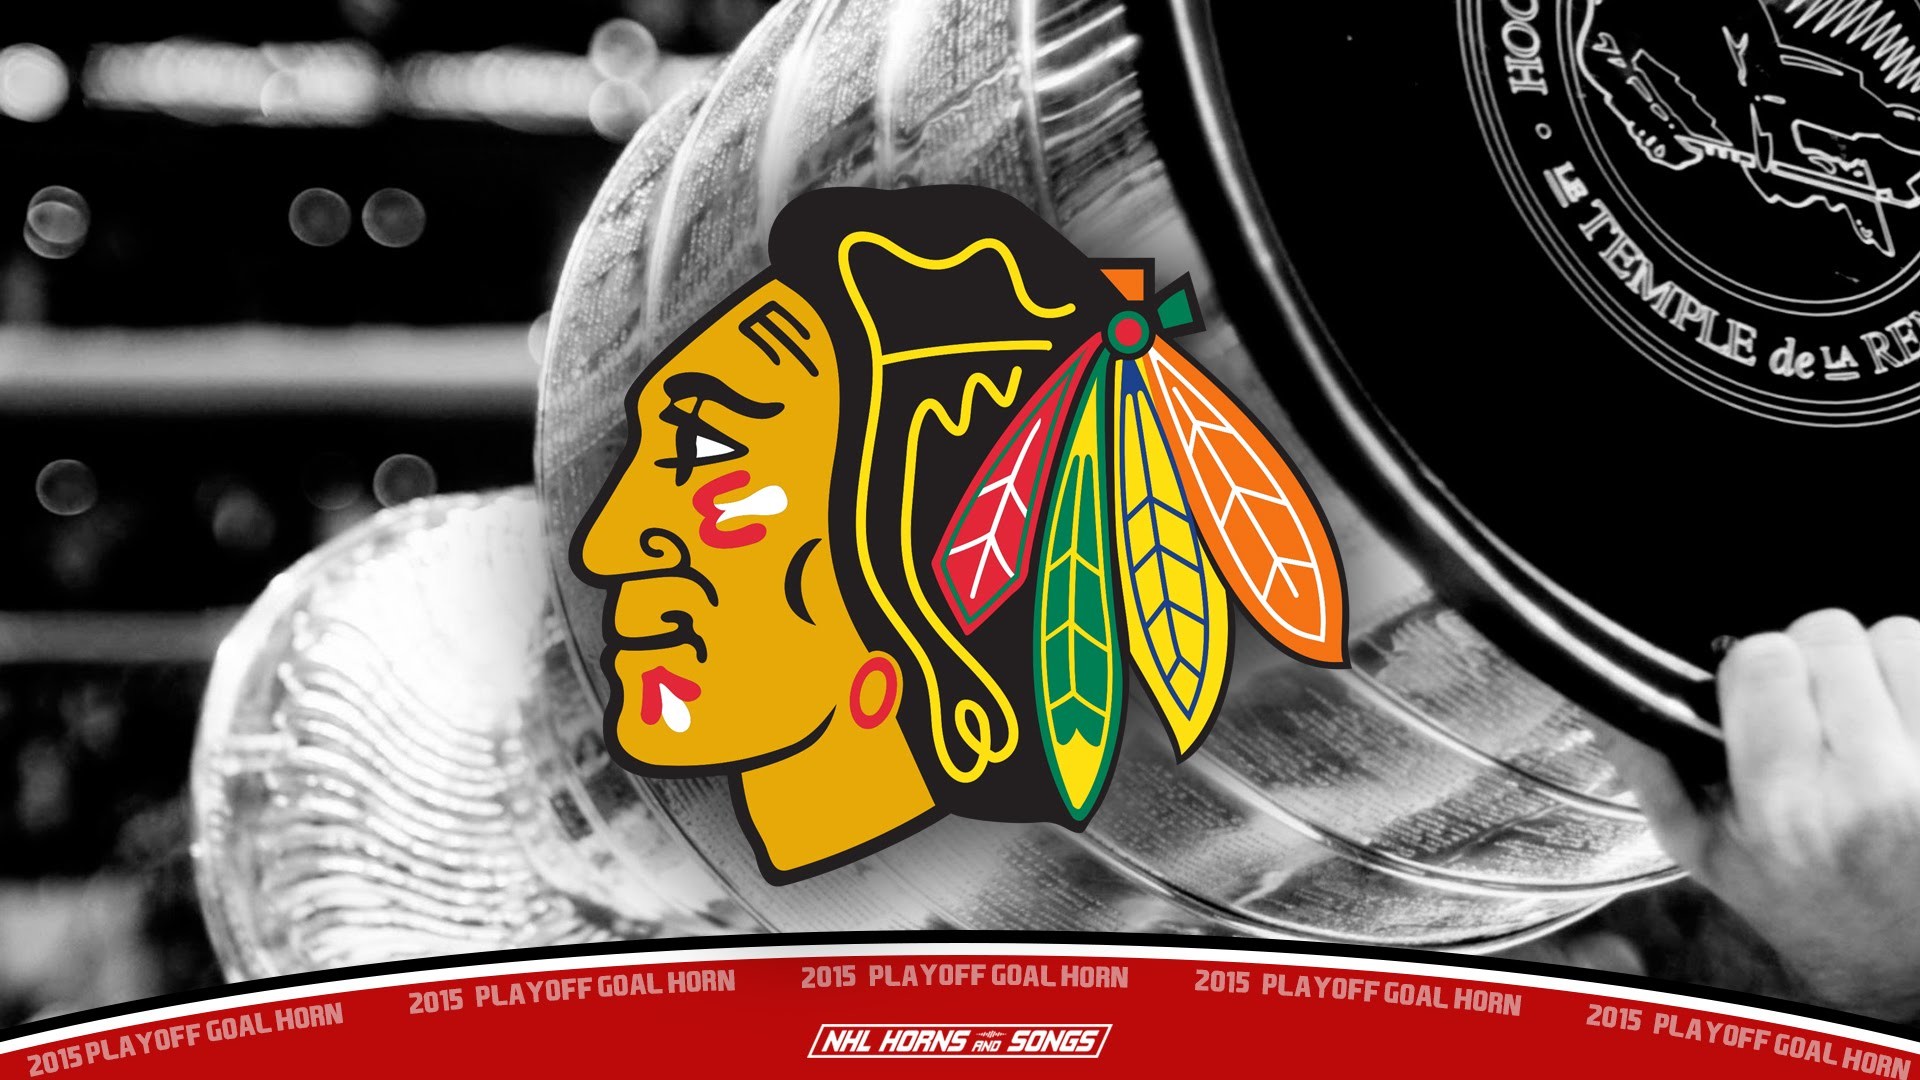 Download wallpapers Chicago Blackhawks flag NHL red black metal  background american hockey team Chicago Blackhawks logo USA hockey  golden logo Chicago Blackhawks for desktop with resolution 2880x1800 High  Quality HD pictures wallpapers